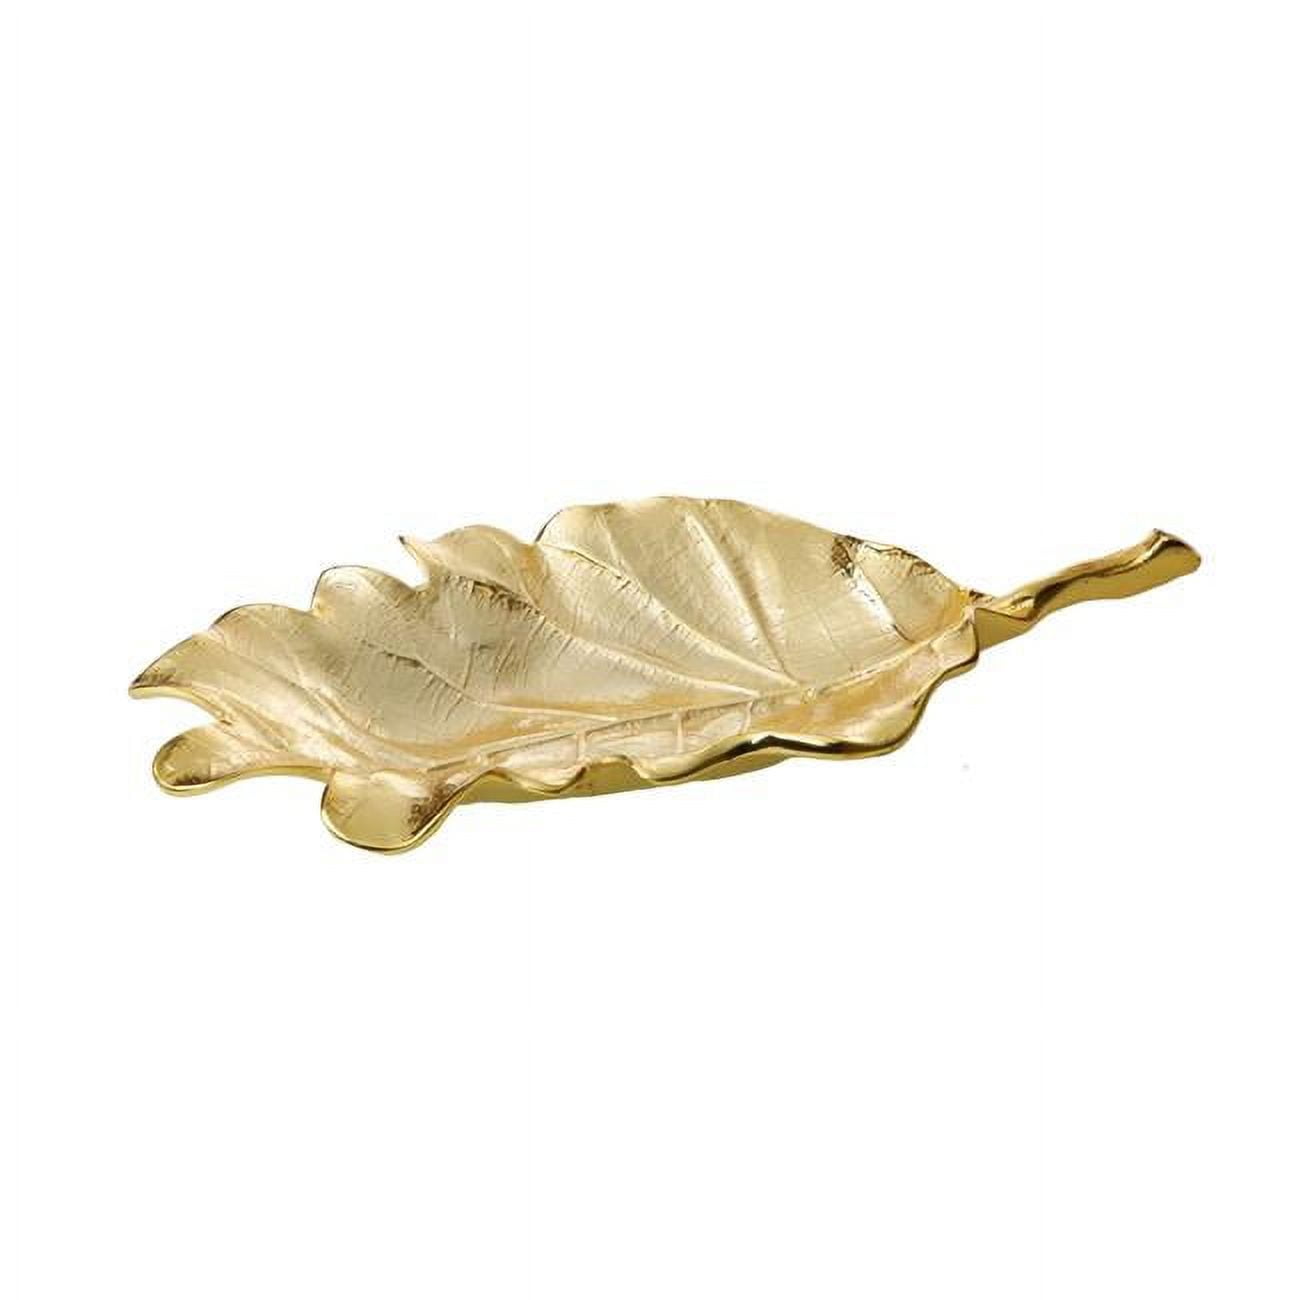 Classic Touch Le927 Gold Leaf Dish - 10.75 X 5.5 X 1.75 In.